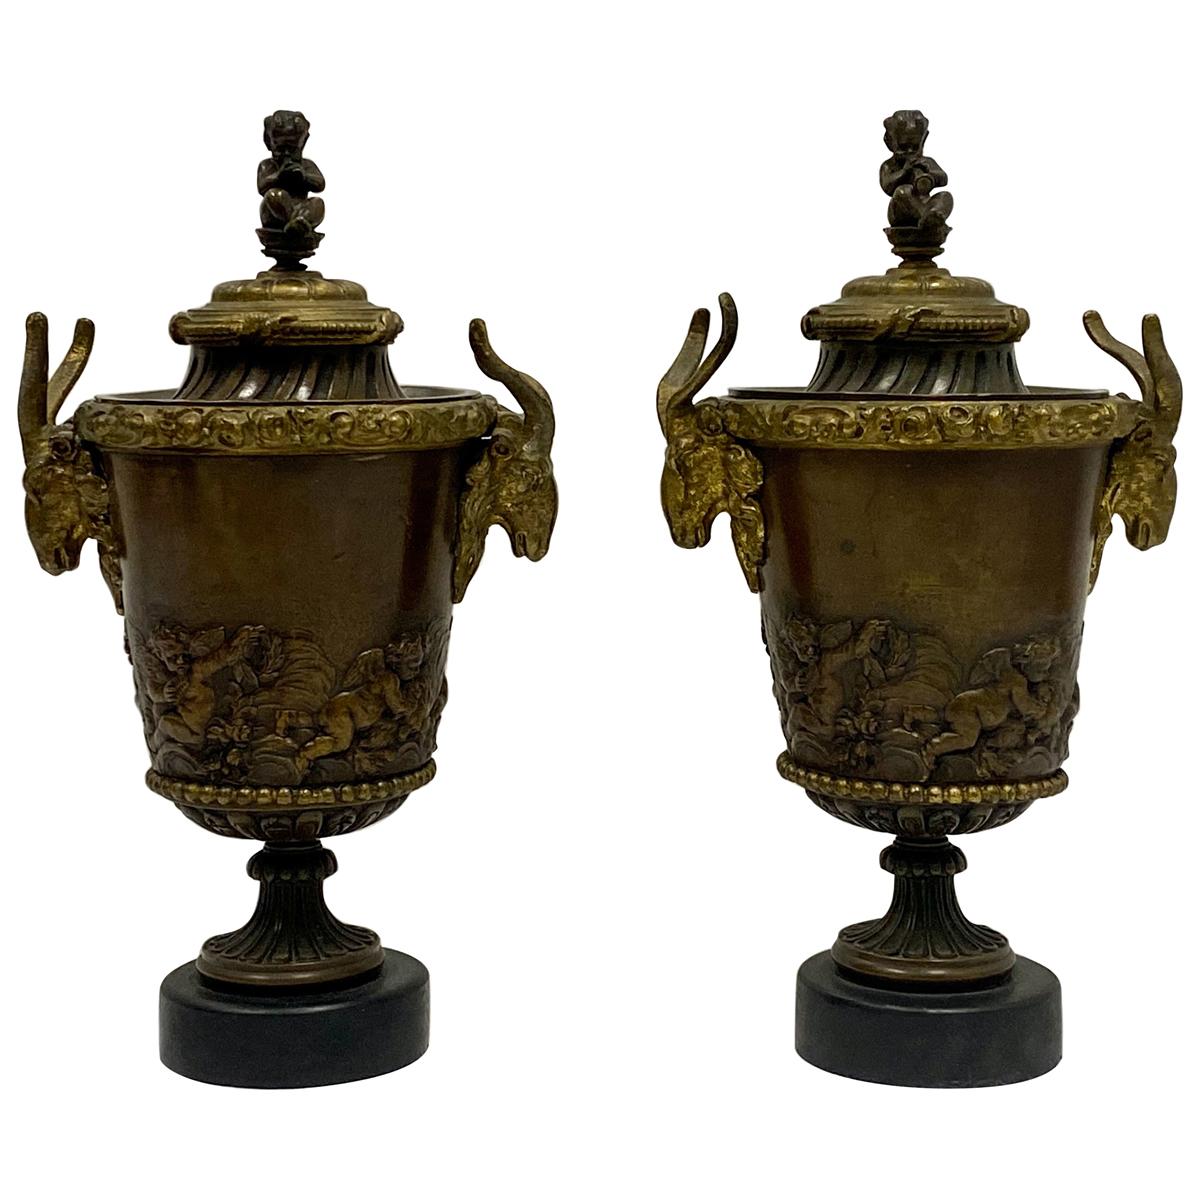 19th Century French Neoclassical Gilt Bronze and Marble Urns, a Pair